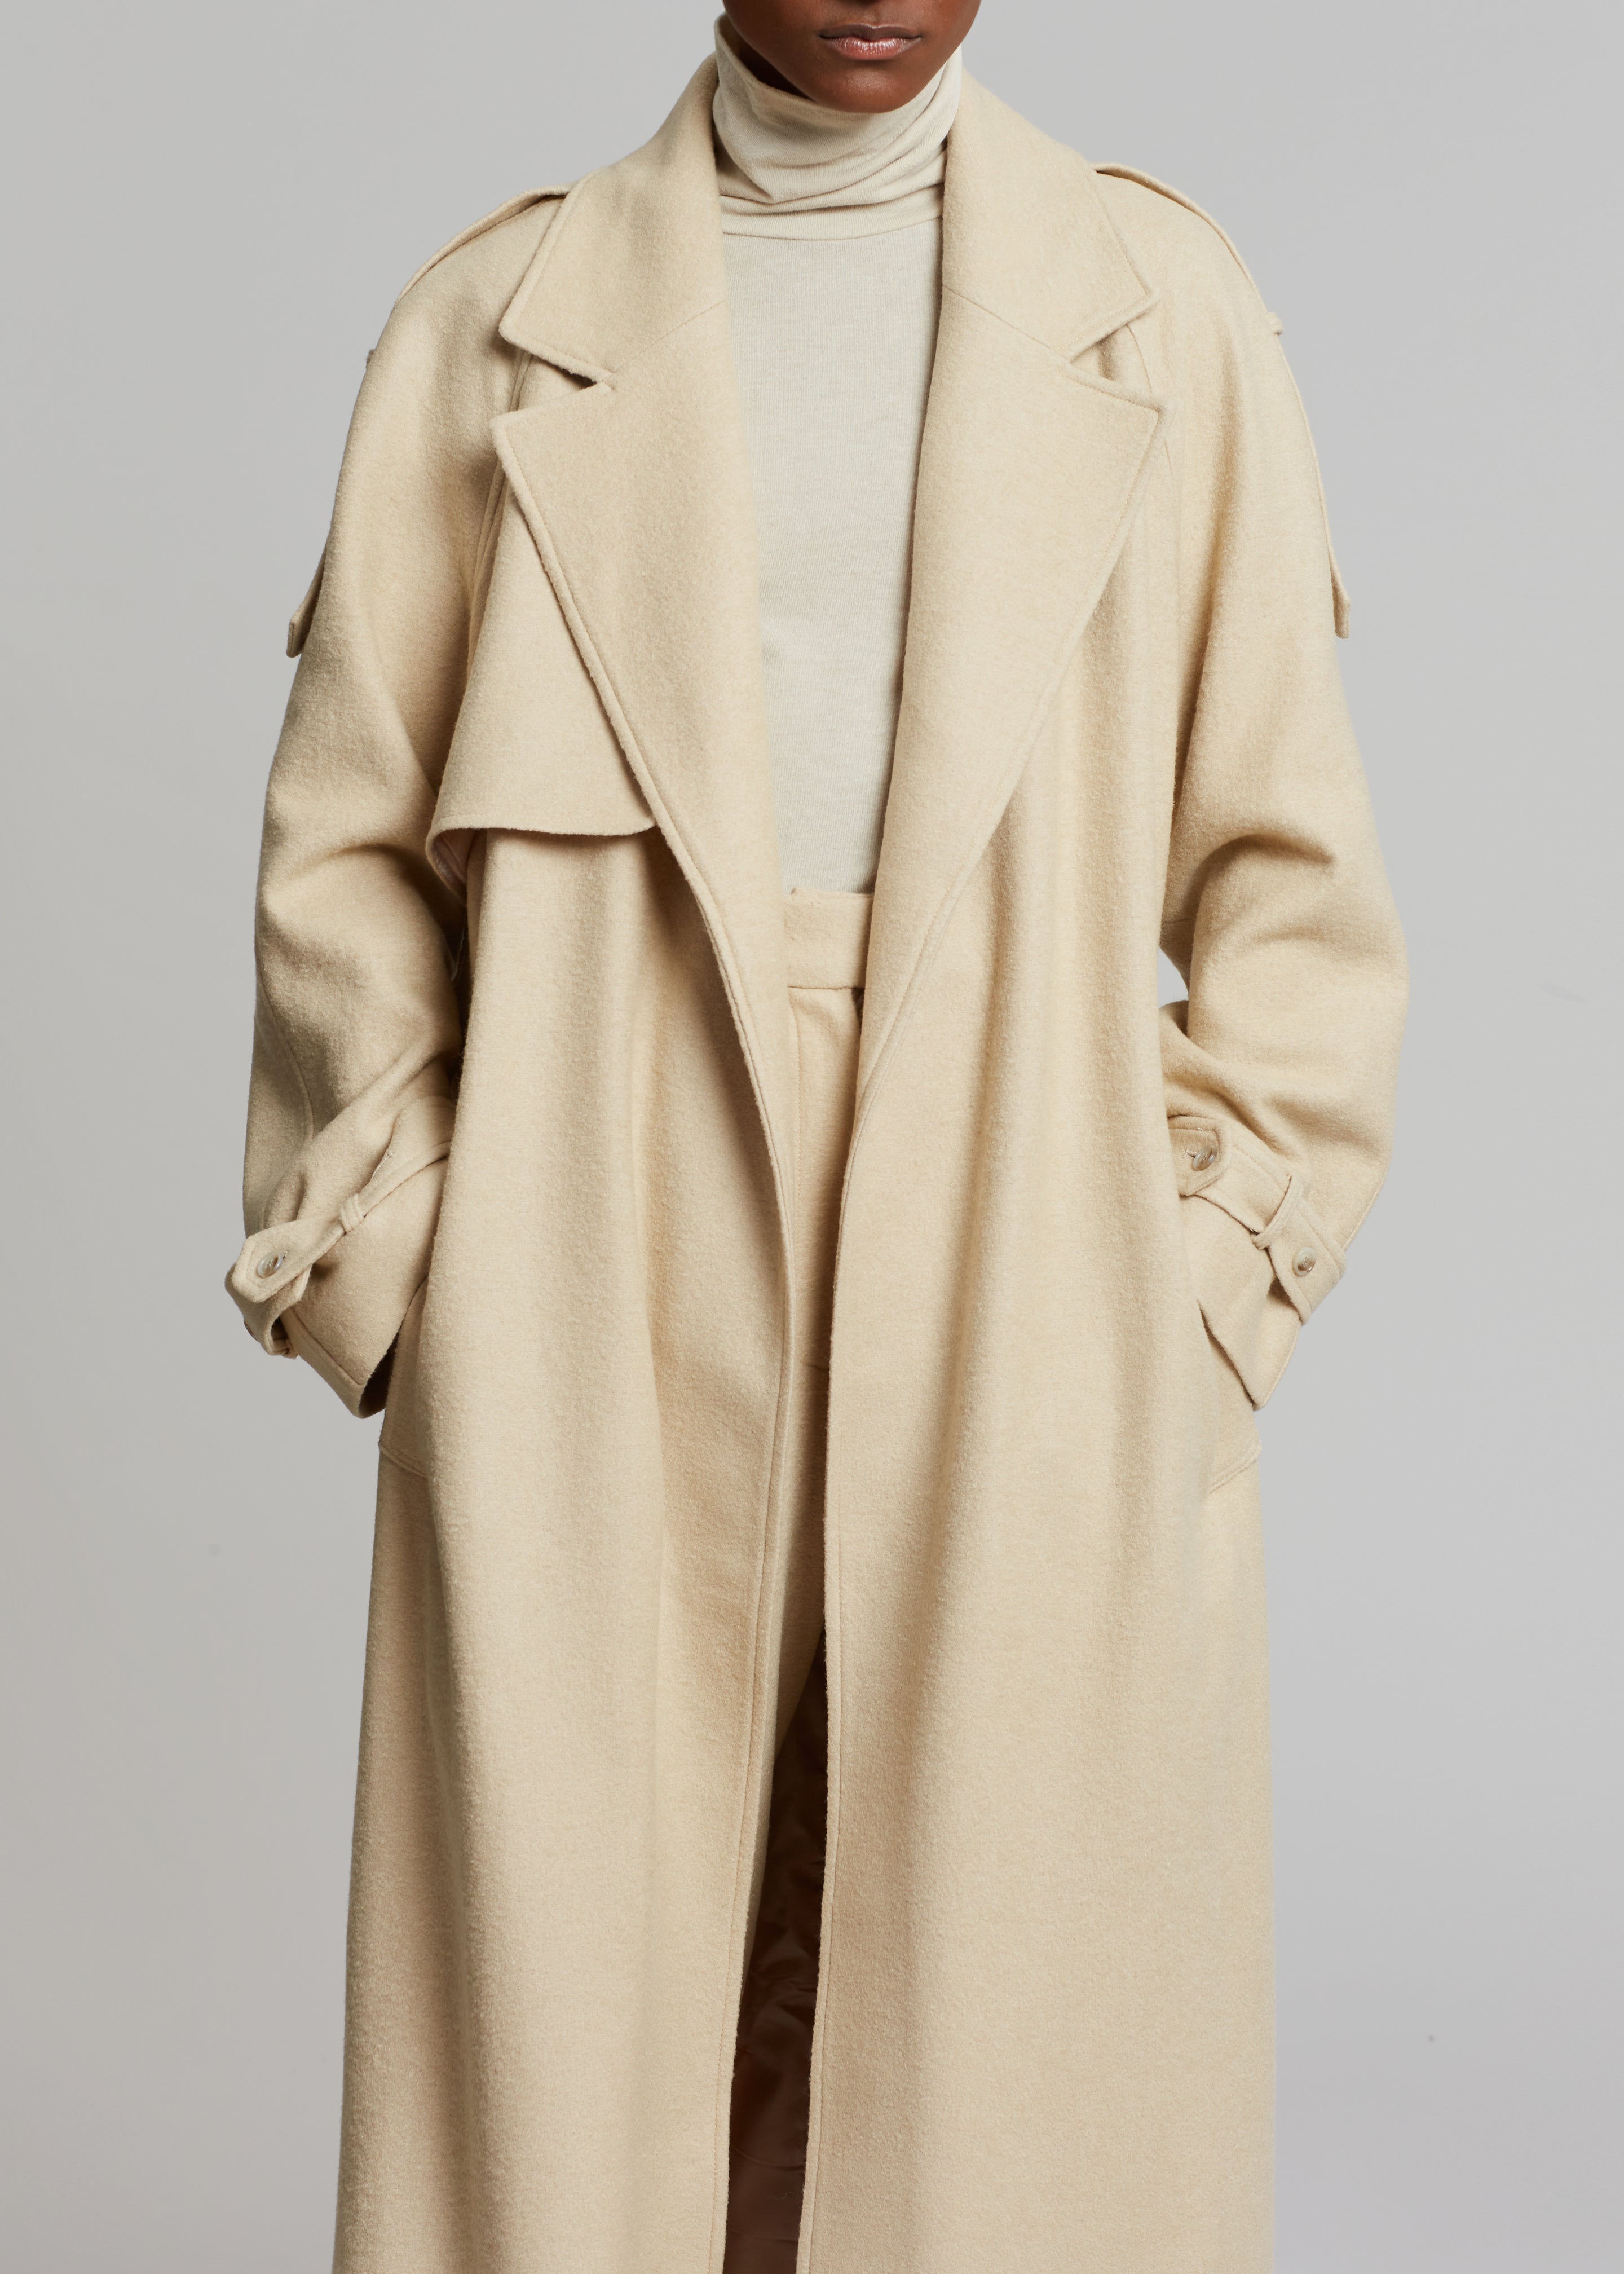 Suzanne Boiled Wool Trench Coat - Beige - 8